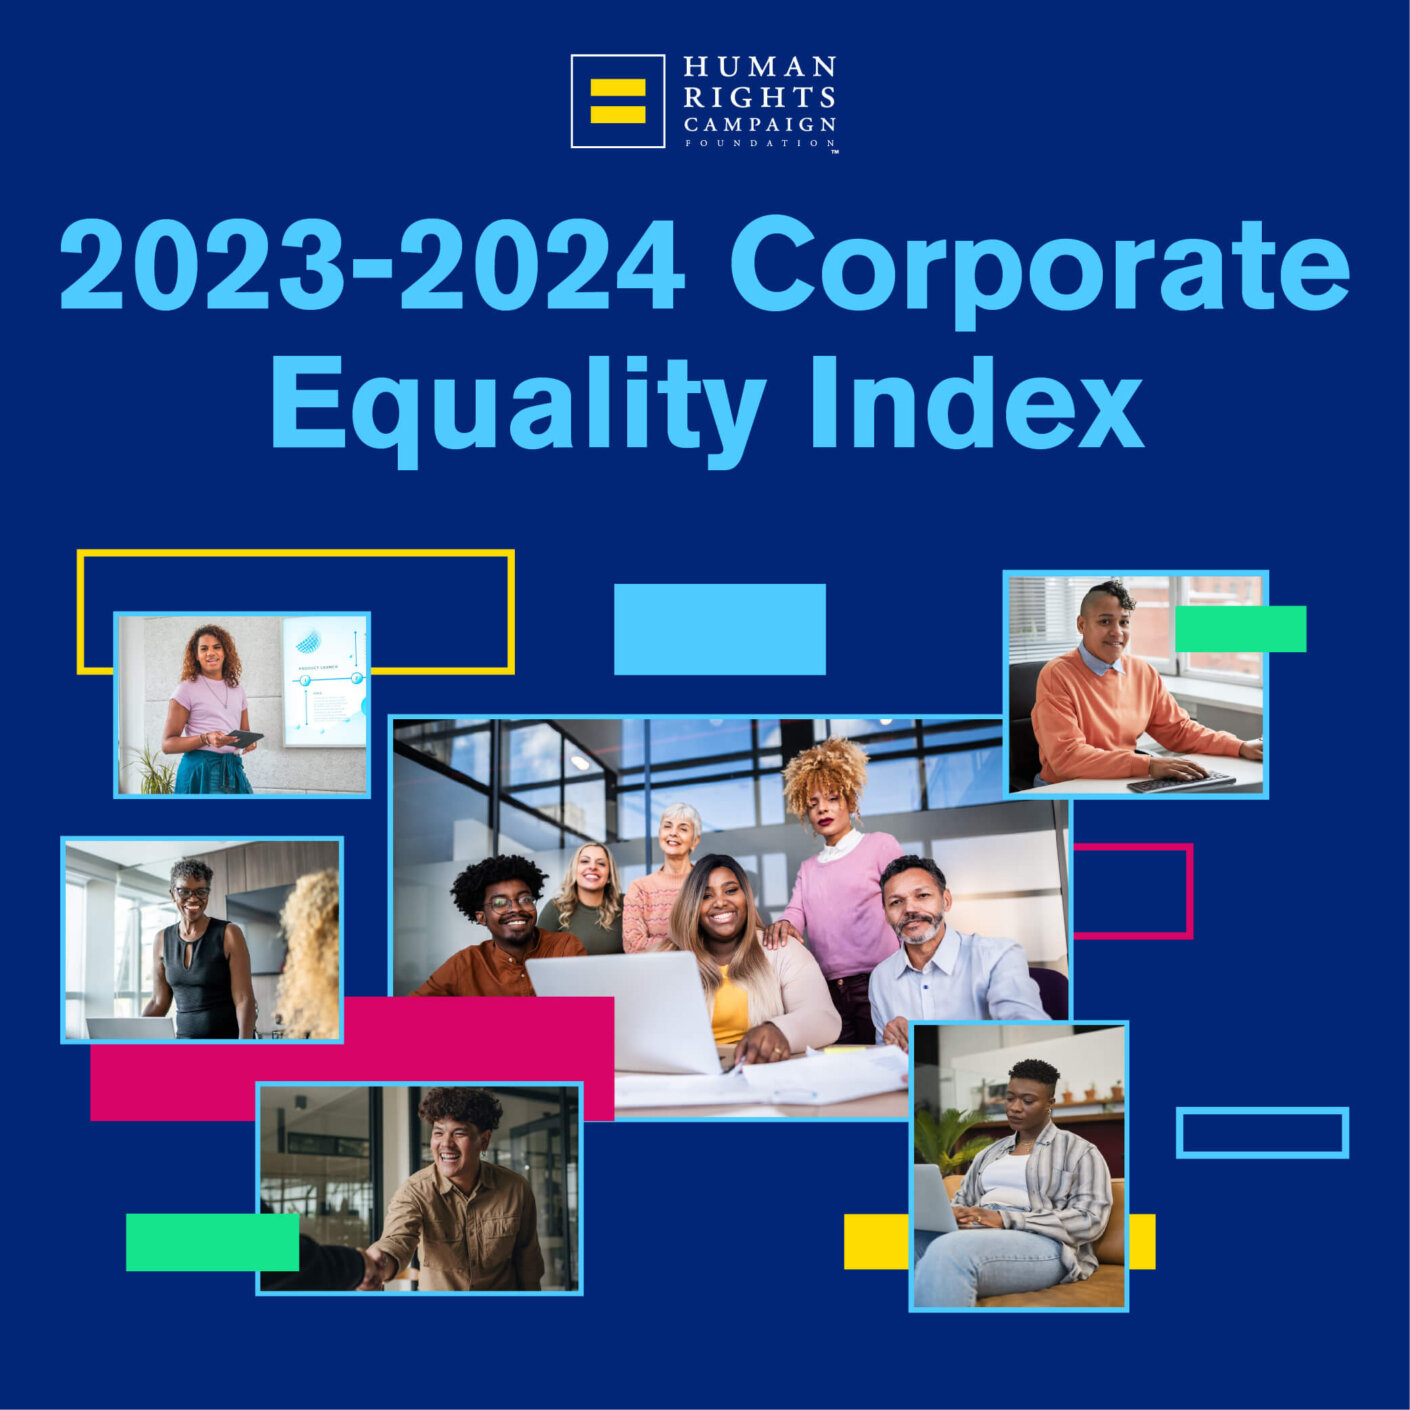 Human Rights Council Foundation, 2023-2024 Corporate Equality Index